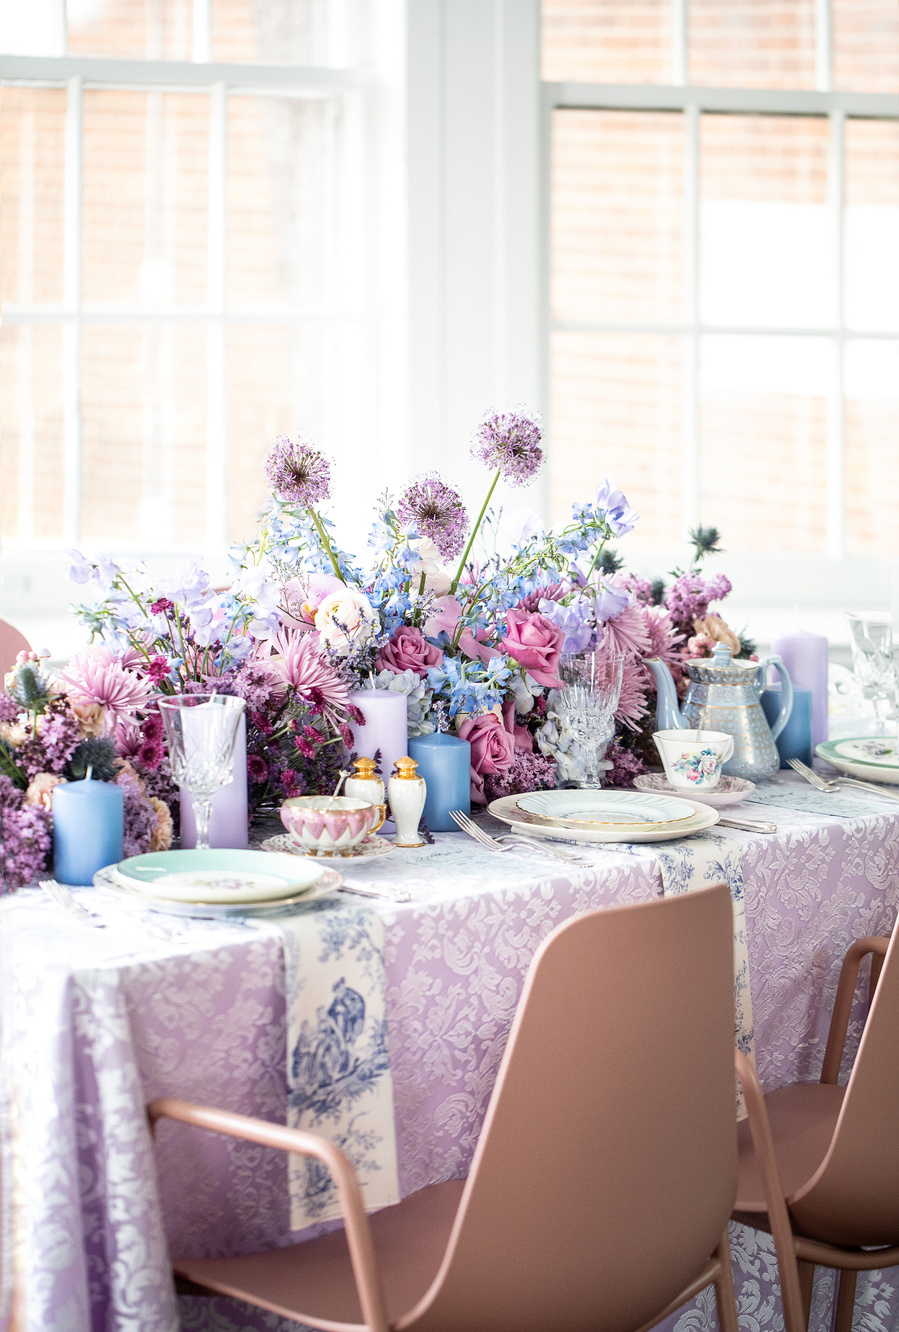 An editorial photography image capturing the whimsy and charm of a Bridgeton style tea party. A table-long floral centerpiece with fine china teacups and saucers, a teapot, and small plates for the desserts.